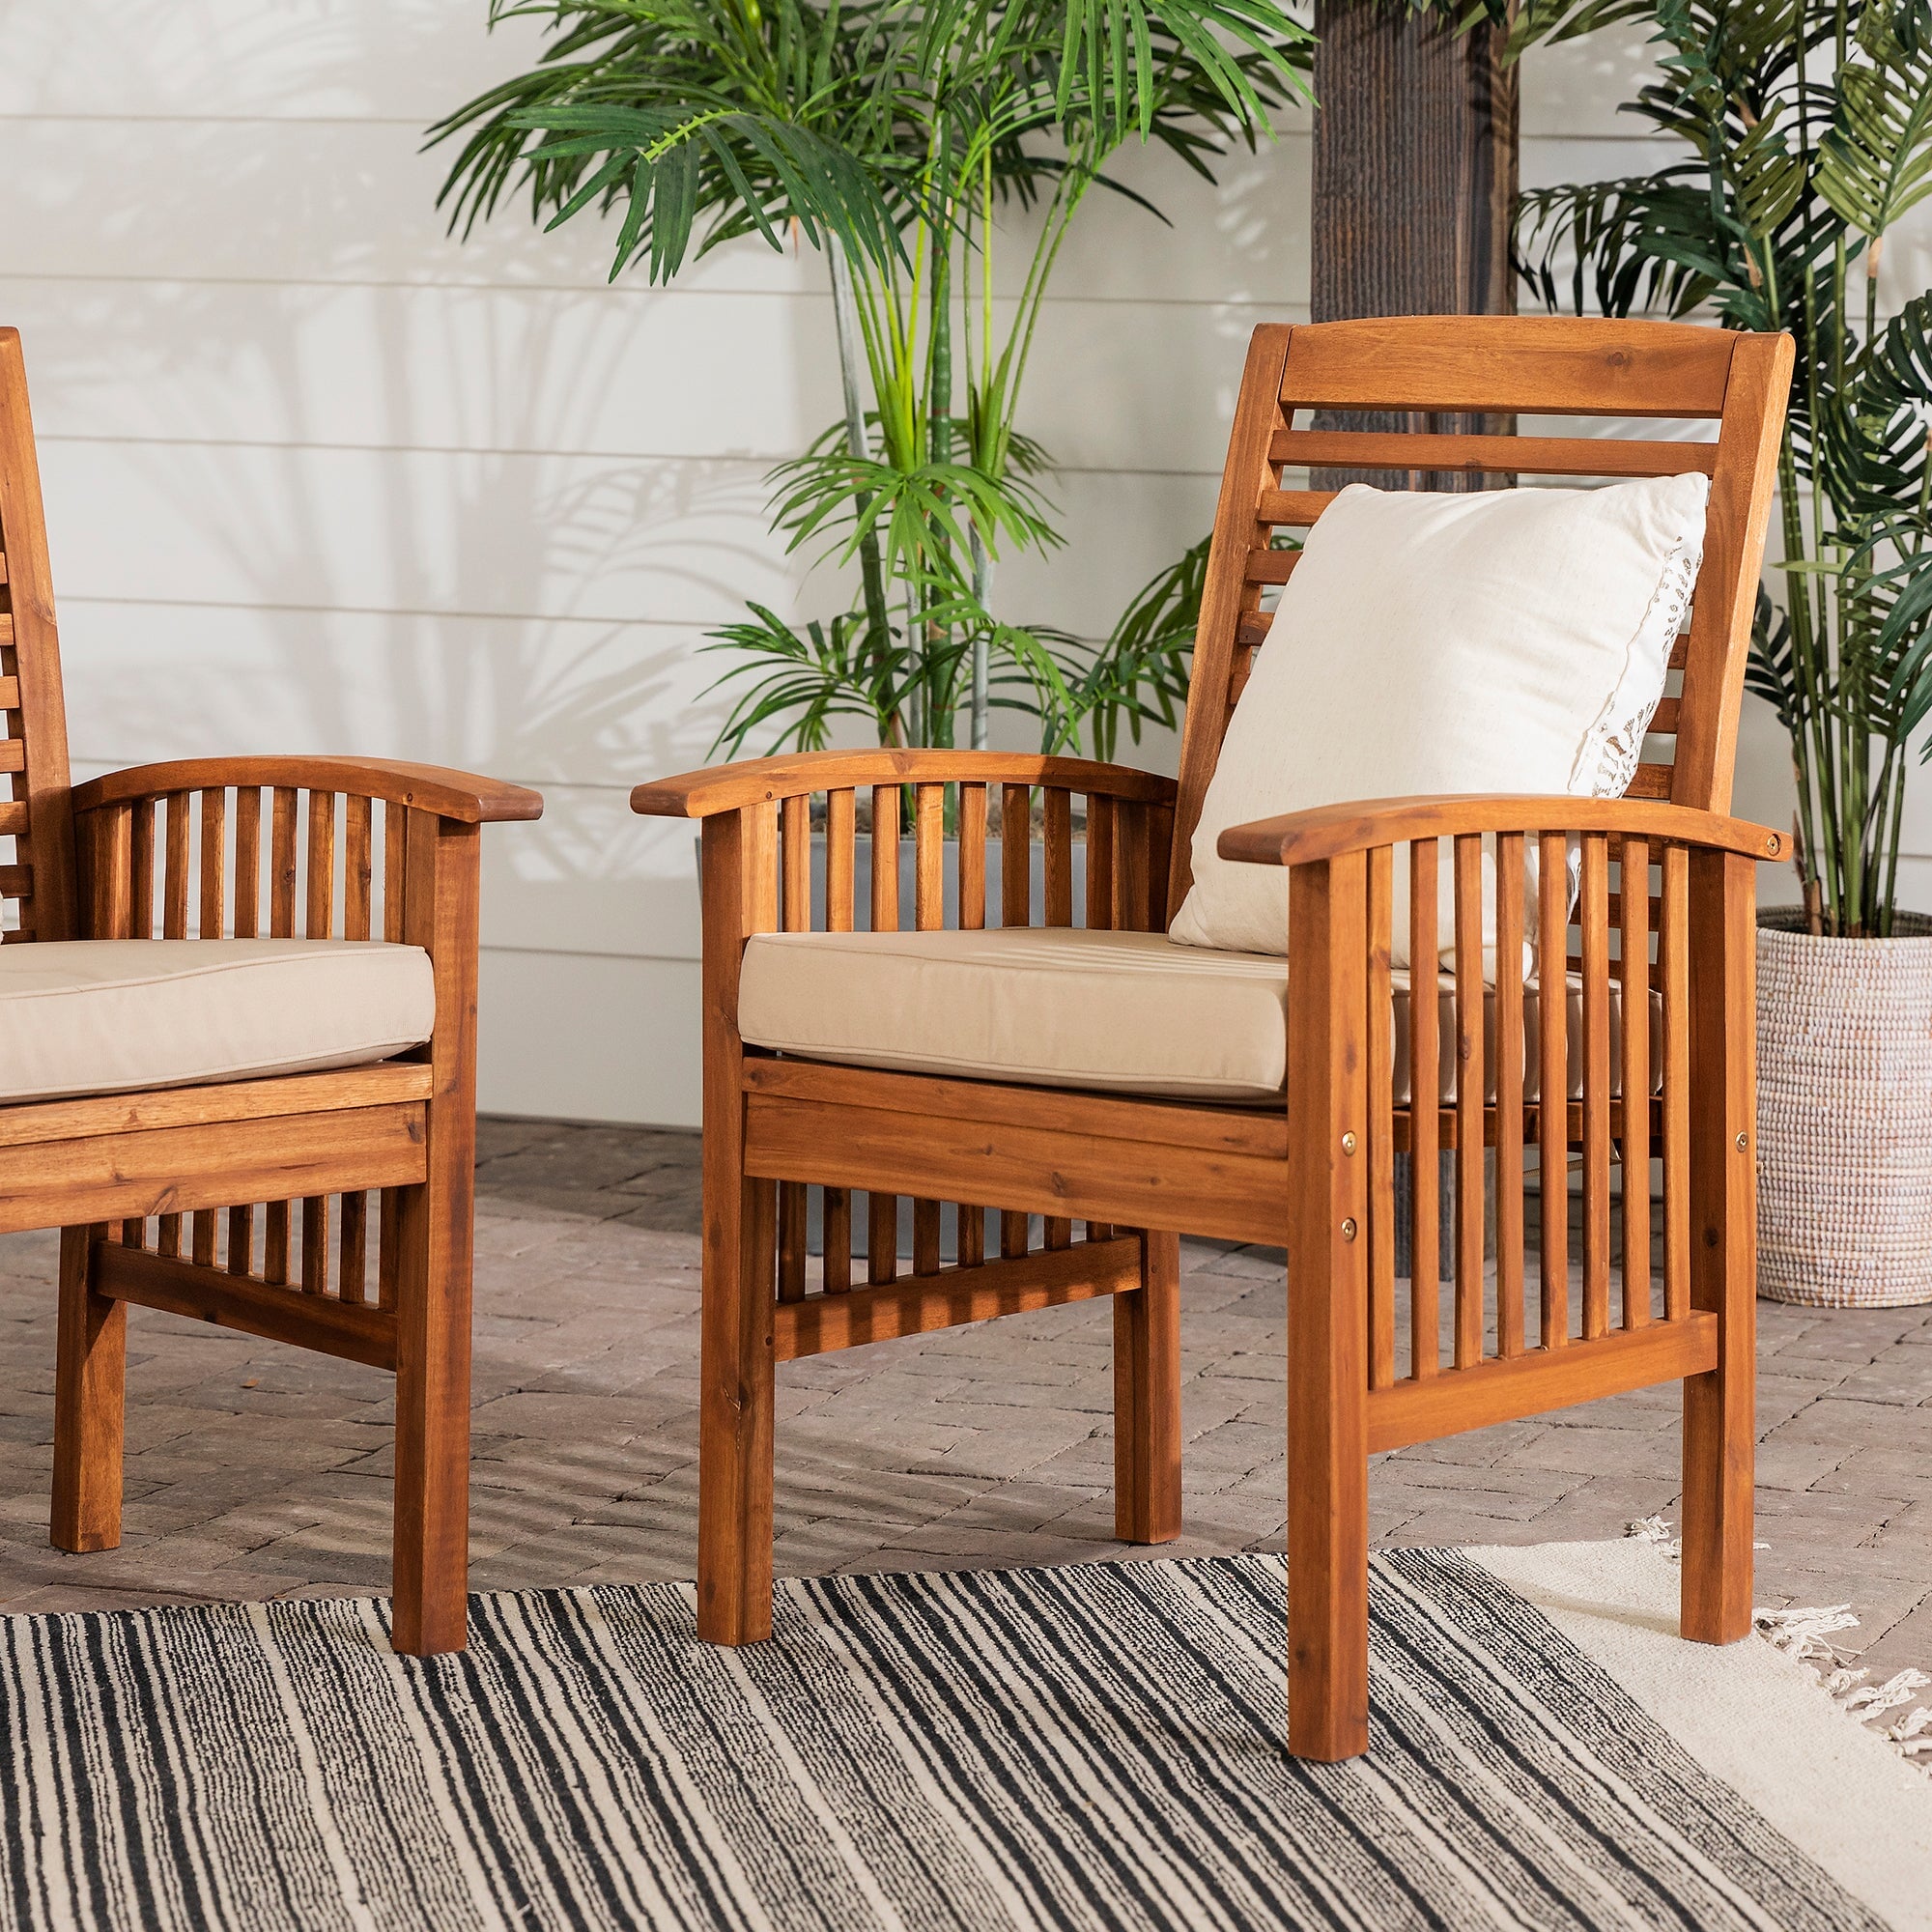 Midland Outdoor Patio Chairs with Cushions, Set of 2